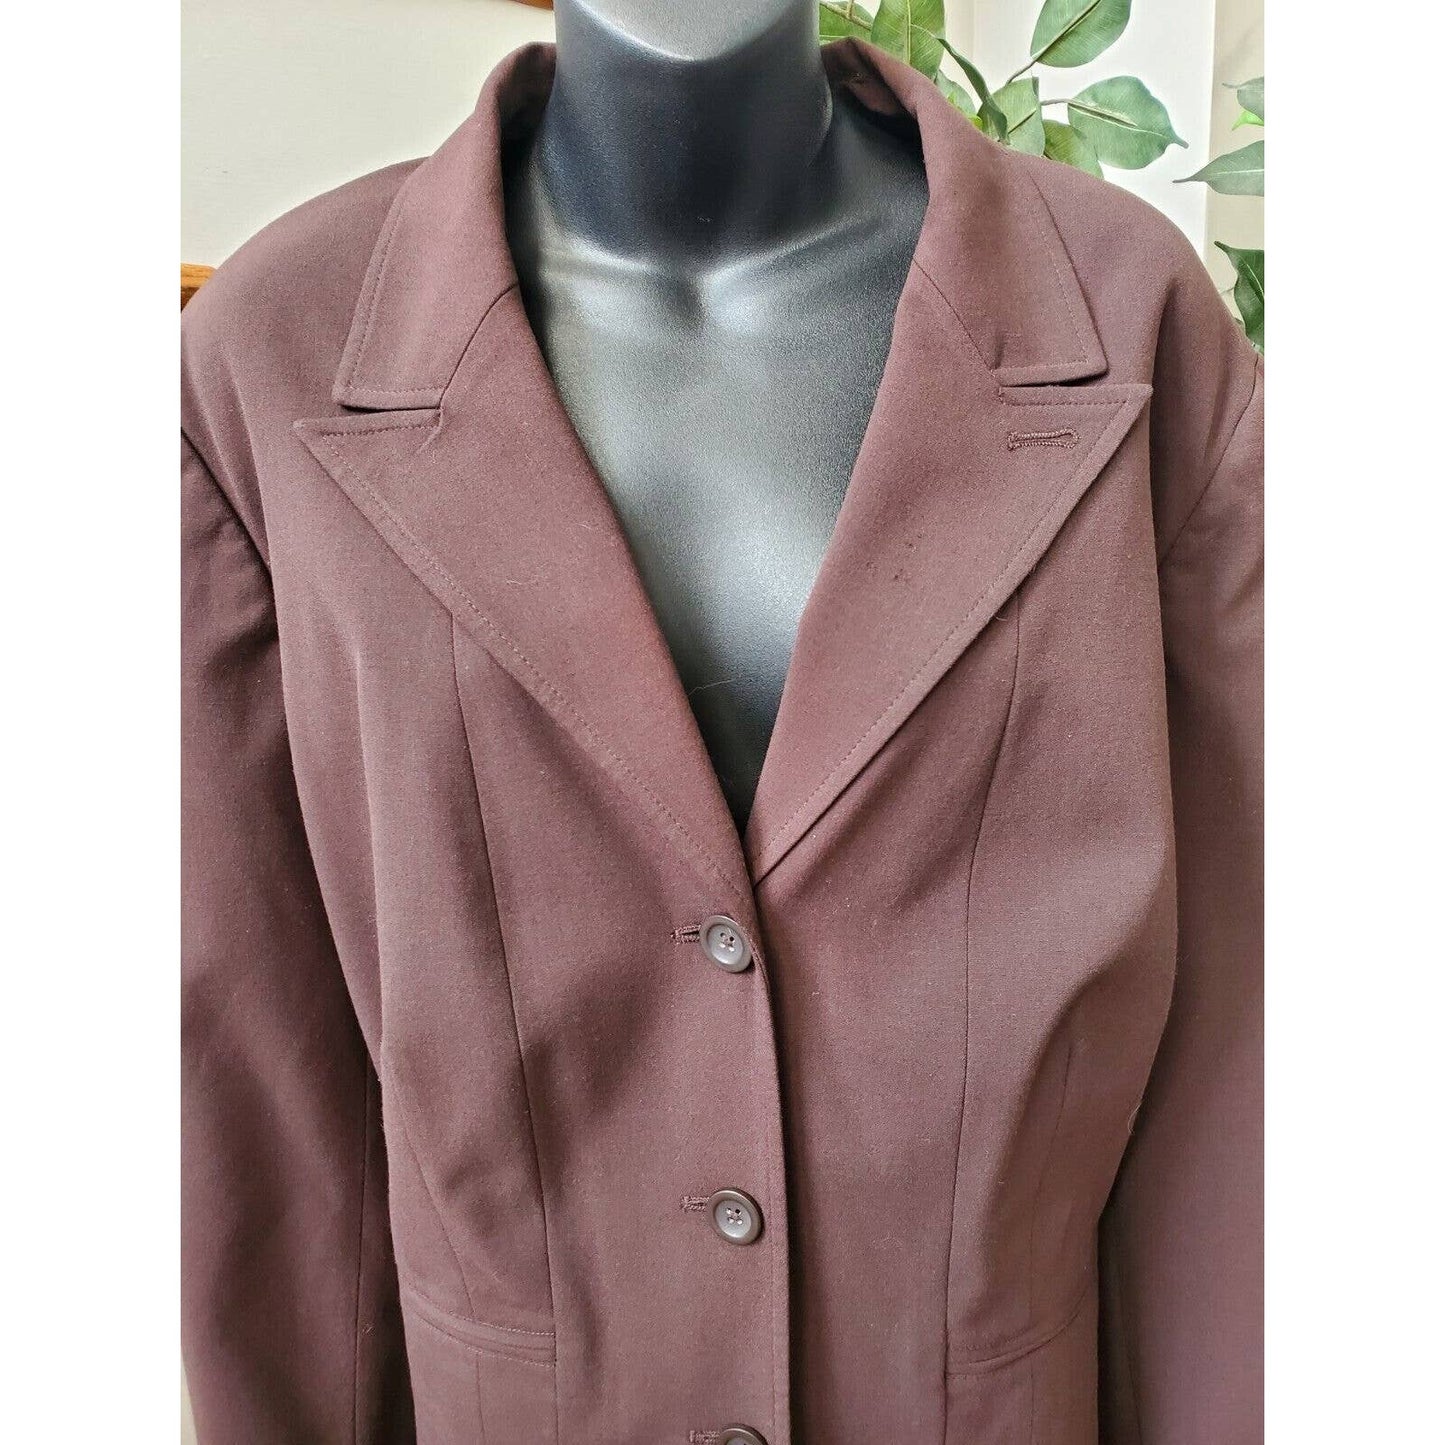 Worthington Women Brown Polyester Single Breasted Blazer & Pant 2 Pc's Suit 22W